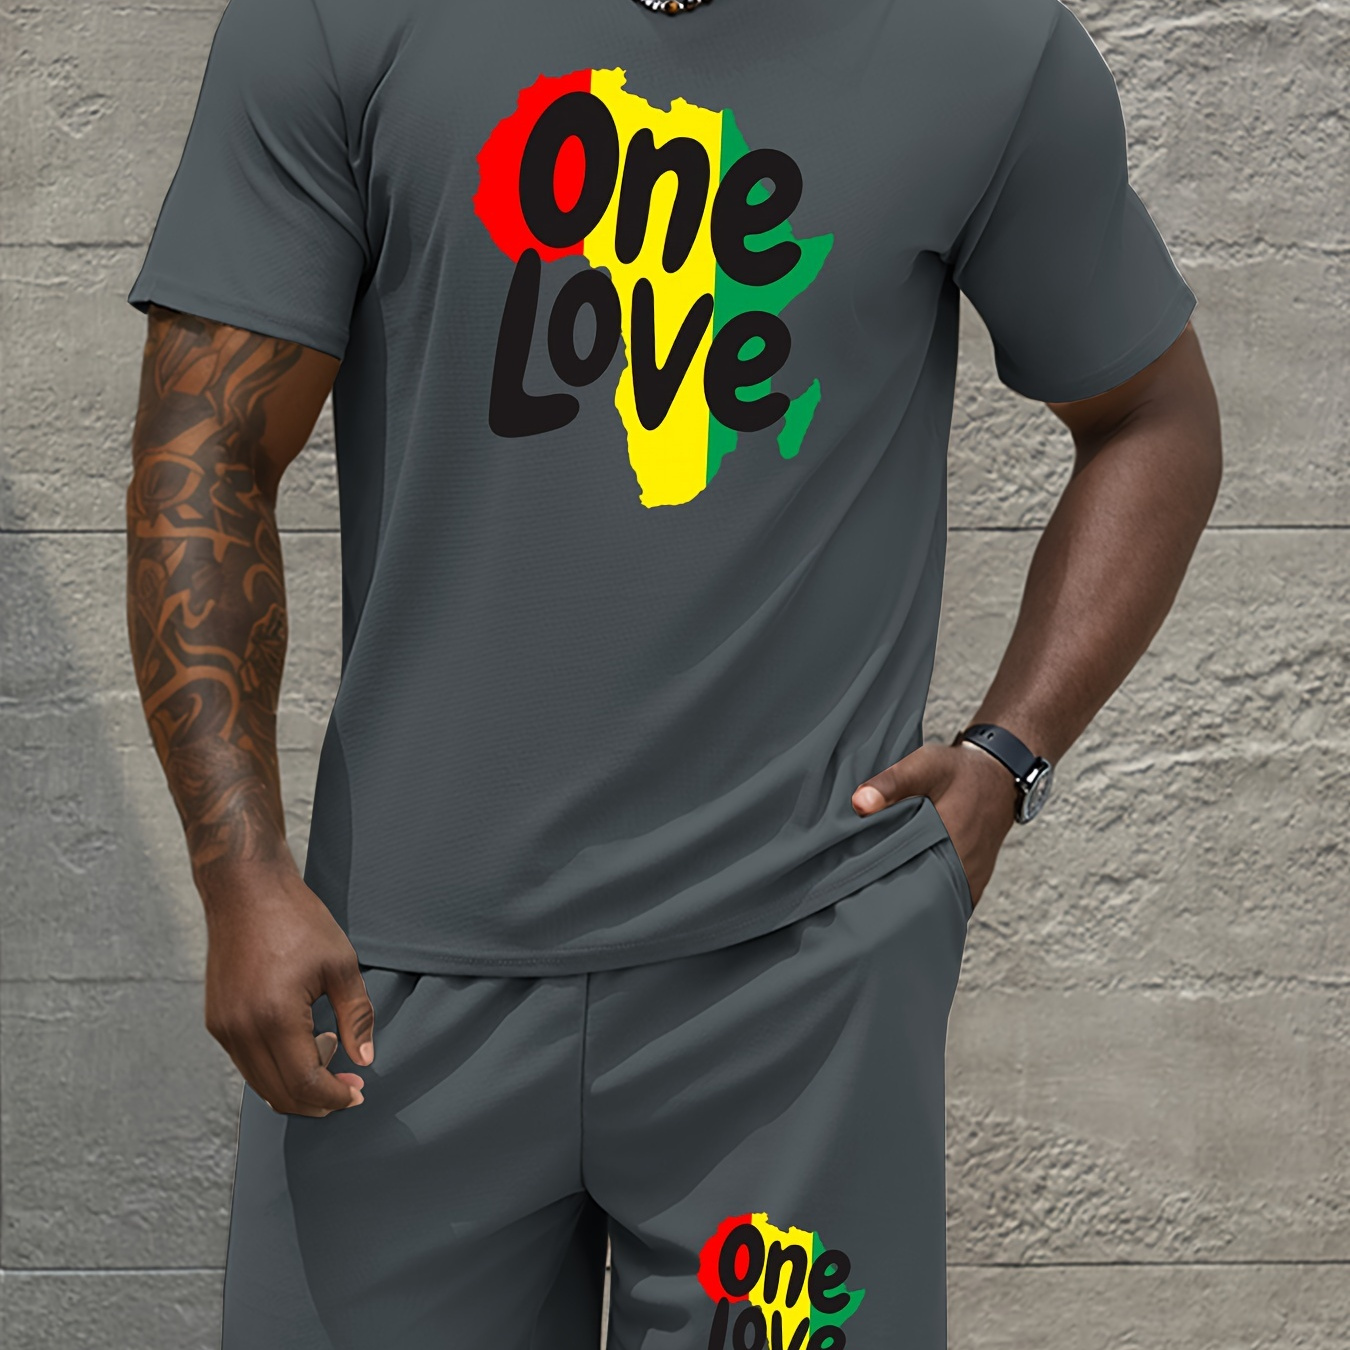 

2pcs/set Men's Waffle Check Pattern Short-sleeve Set, "one Love" With Flag Print Crew Neck T-shirt, Casual Drawstring Shorts, Cozy Clothing For Outdoor Activities